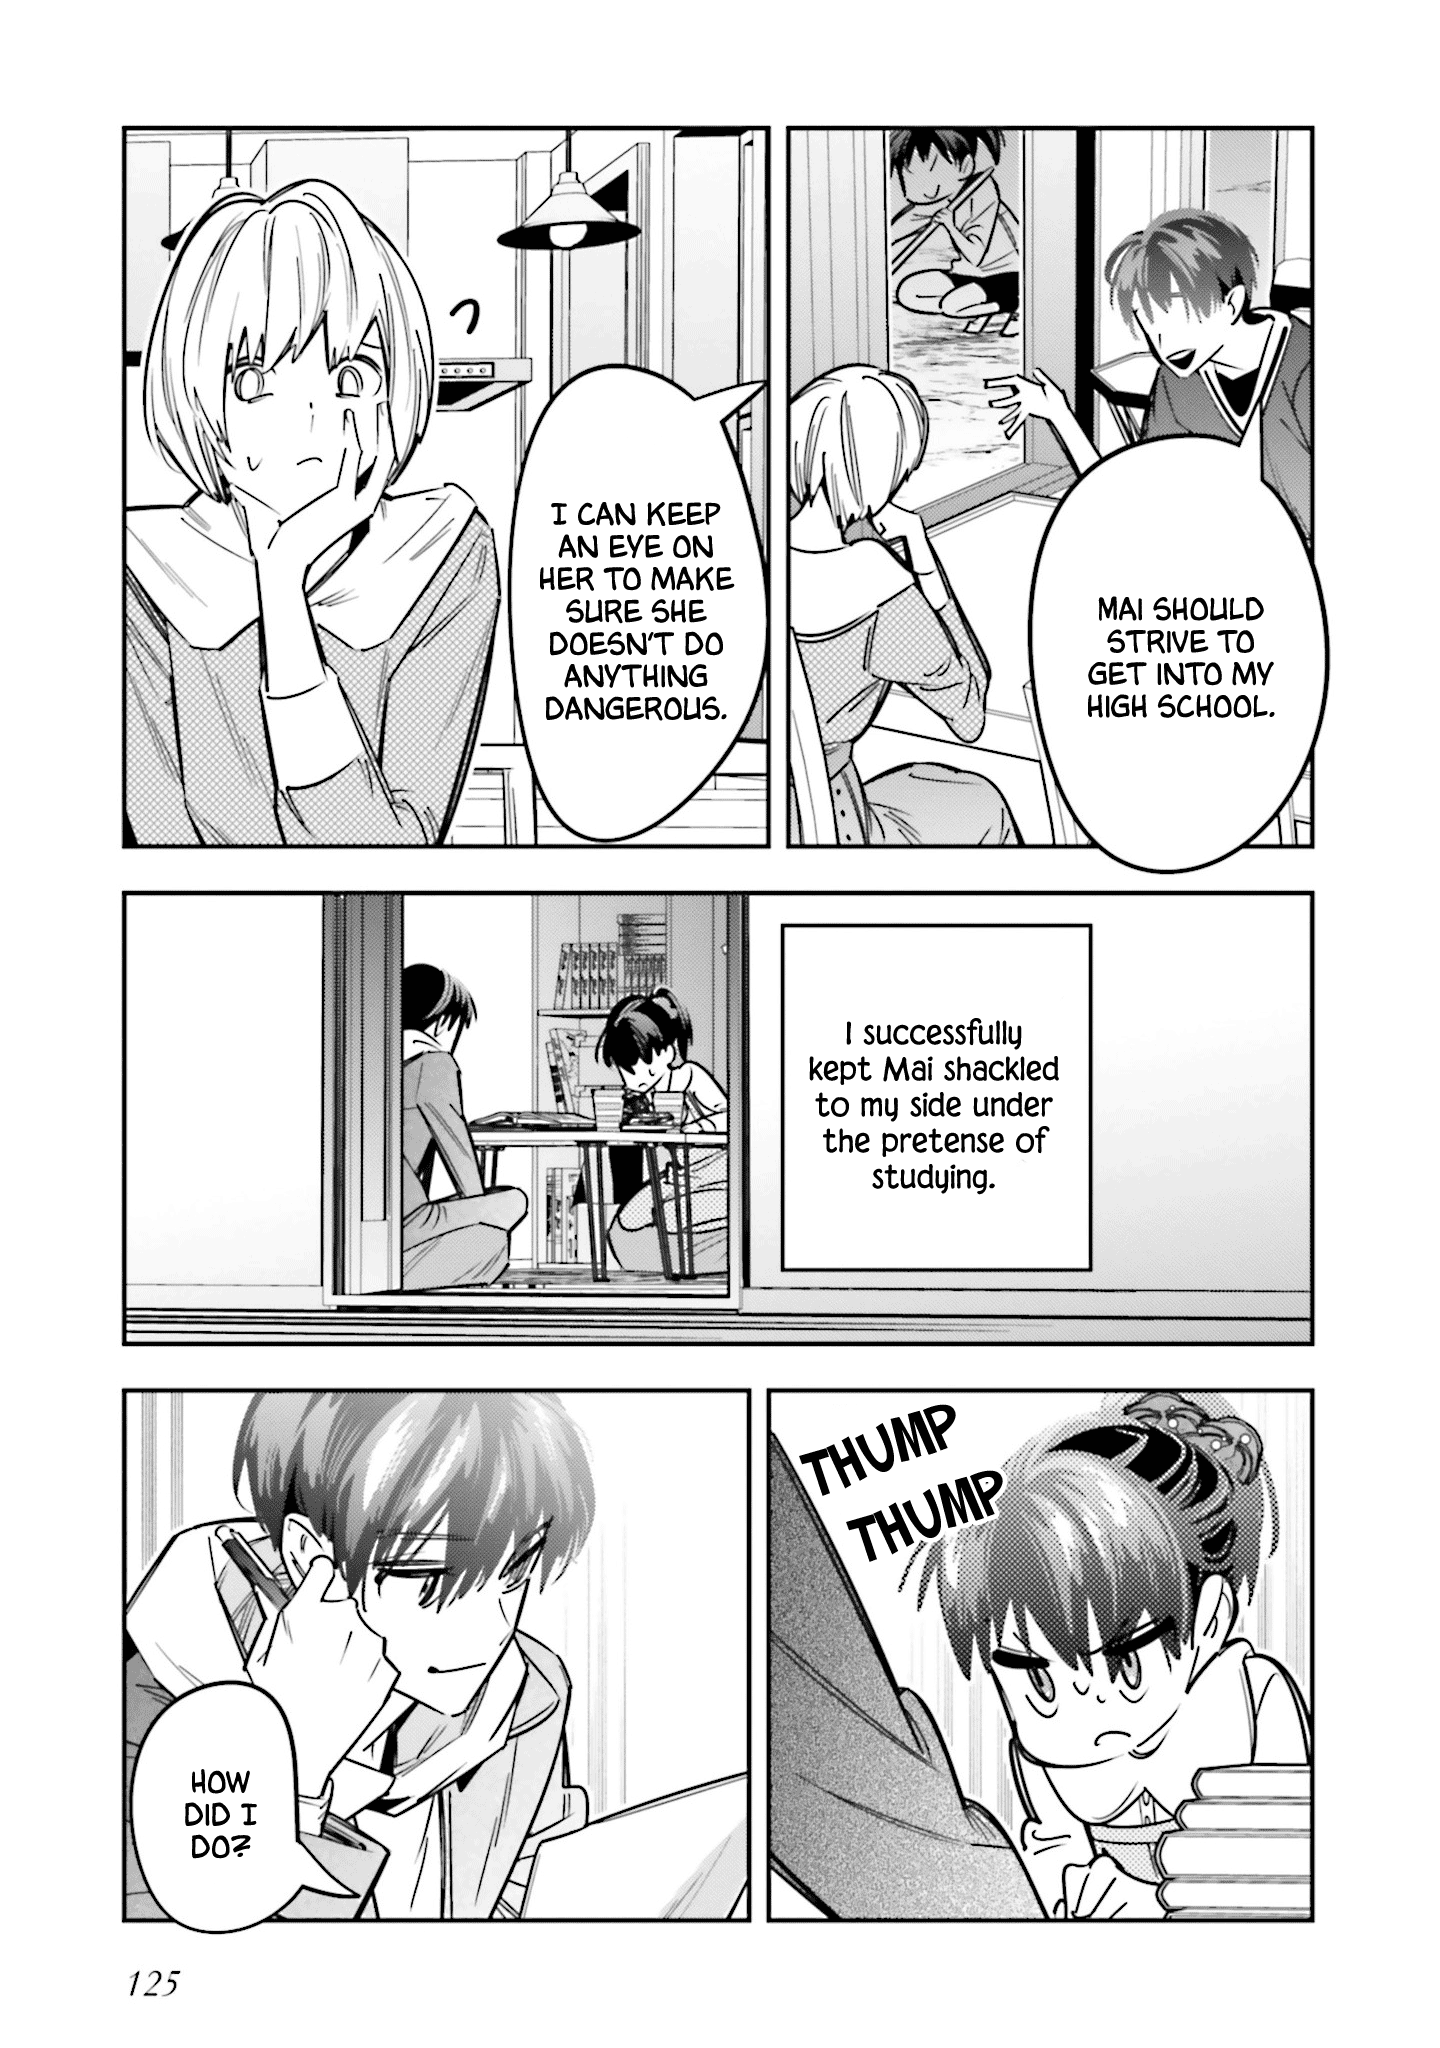 I Reincarnated As The Little Sister Of A Death Game Manga's Murder Mastermind And Failed Chapter 9 #7